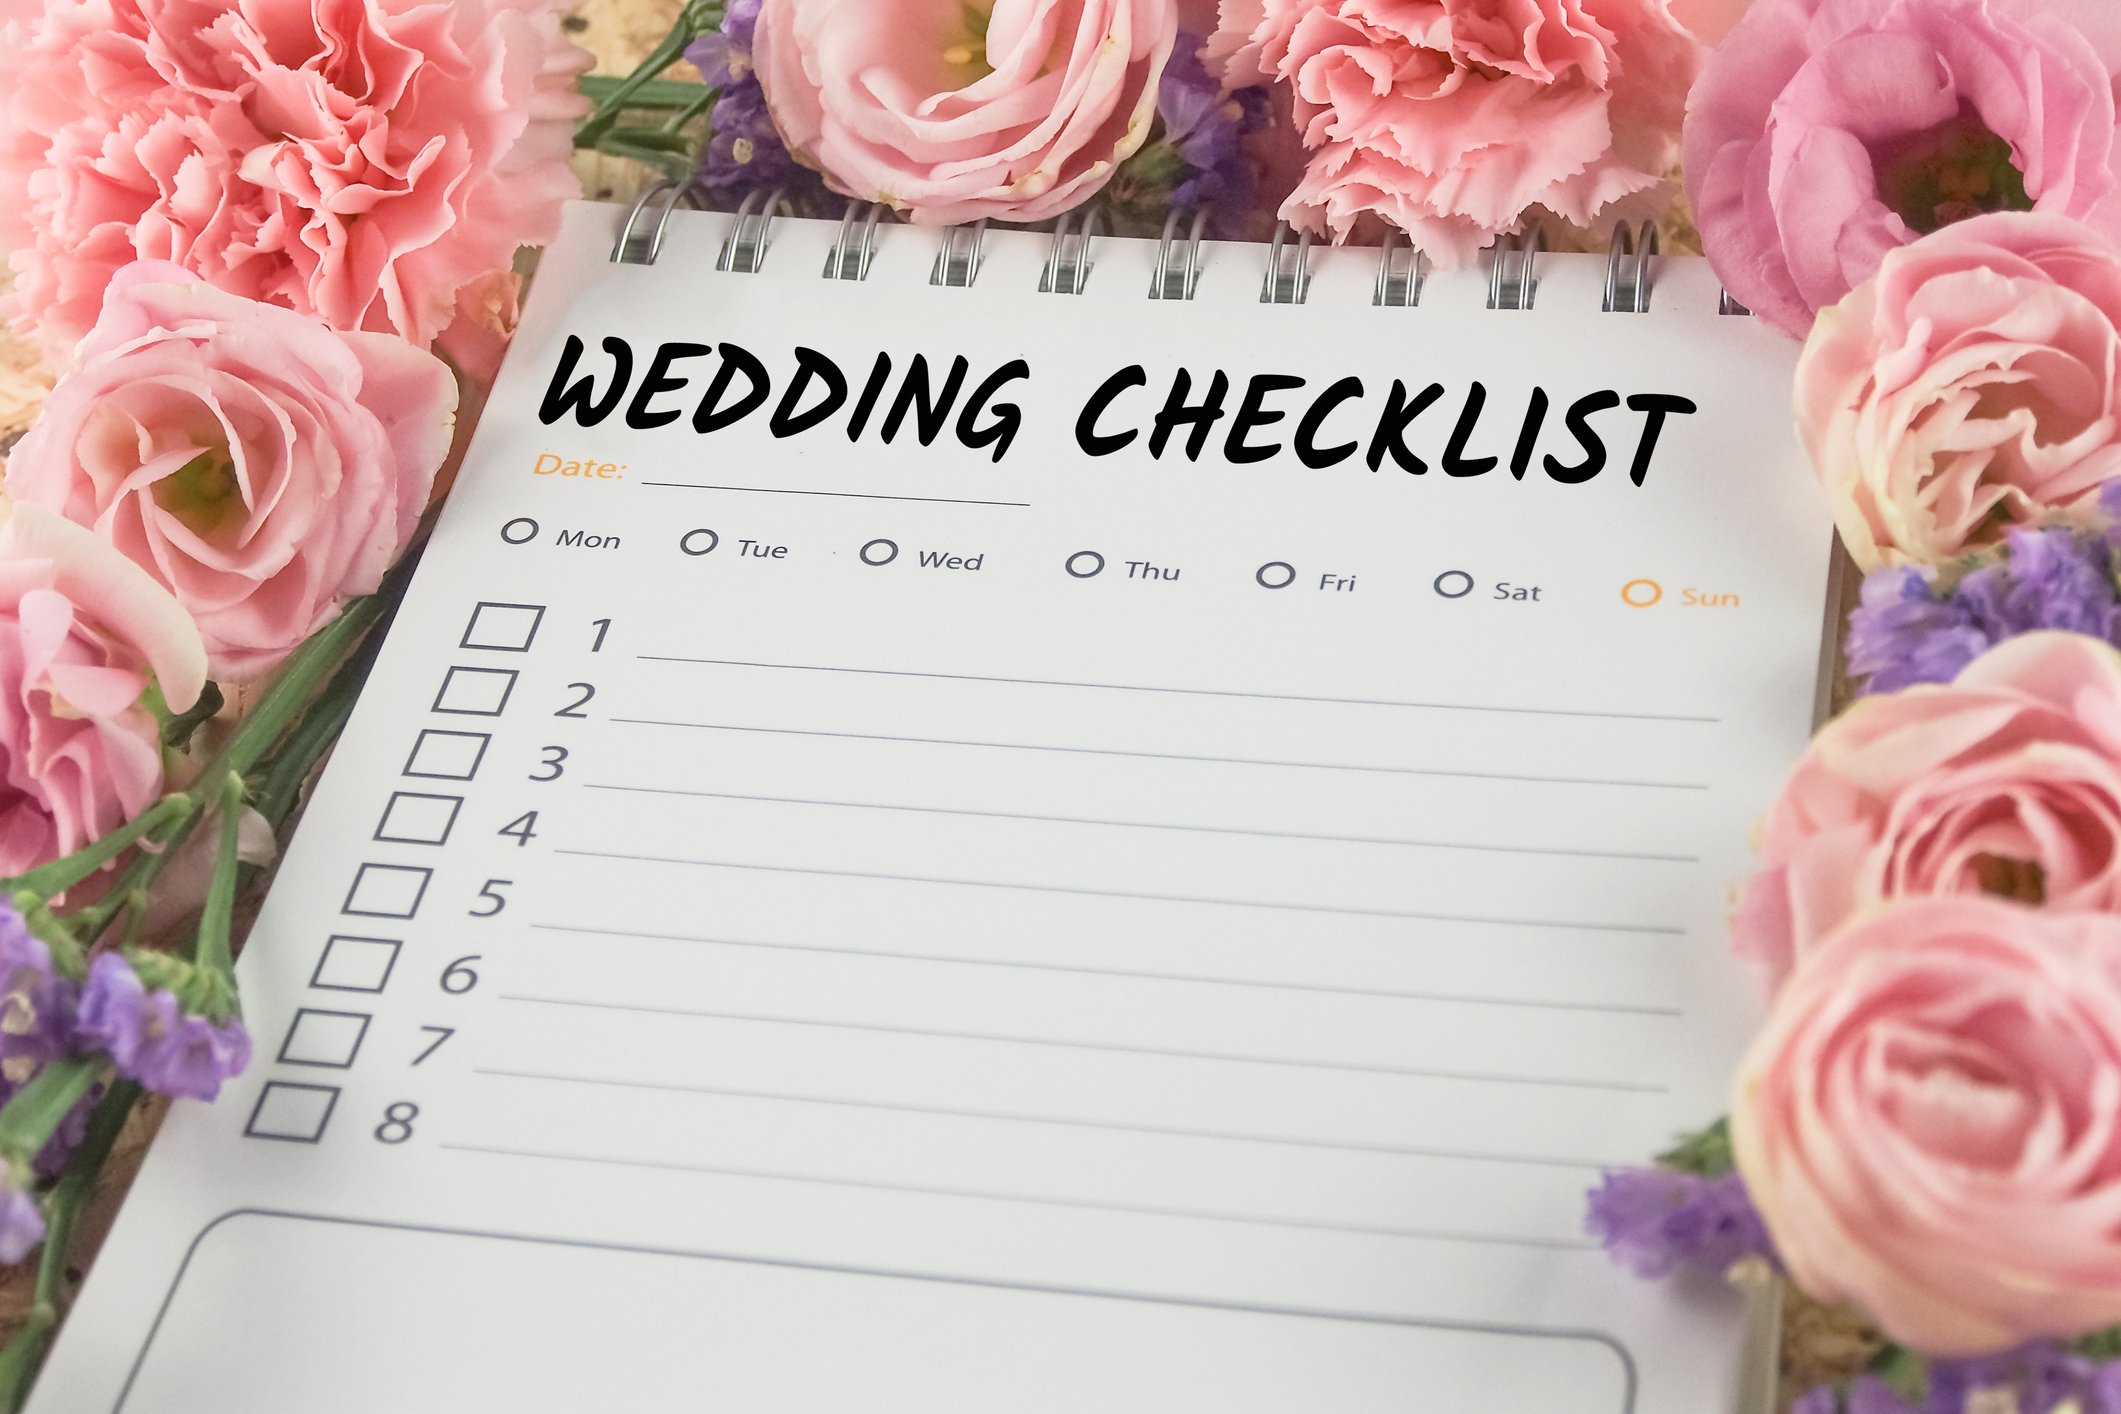 a blank wedding checklist on a bed of pink roses